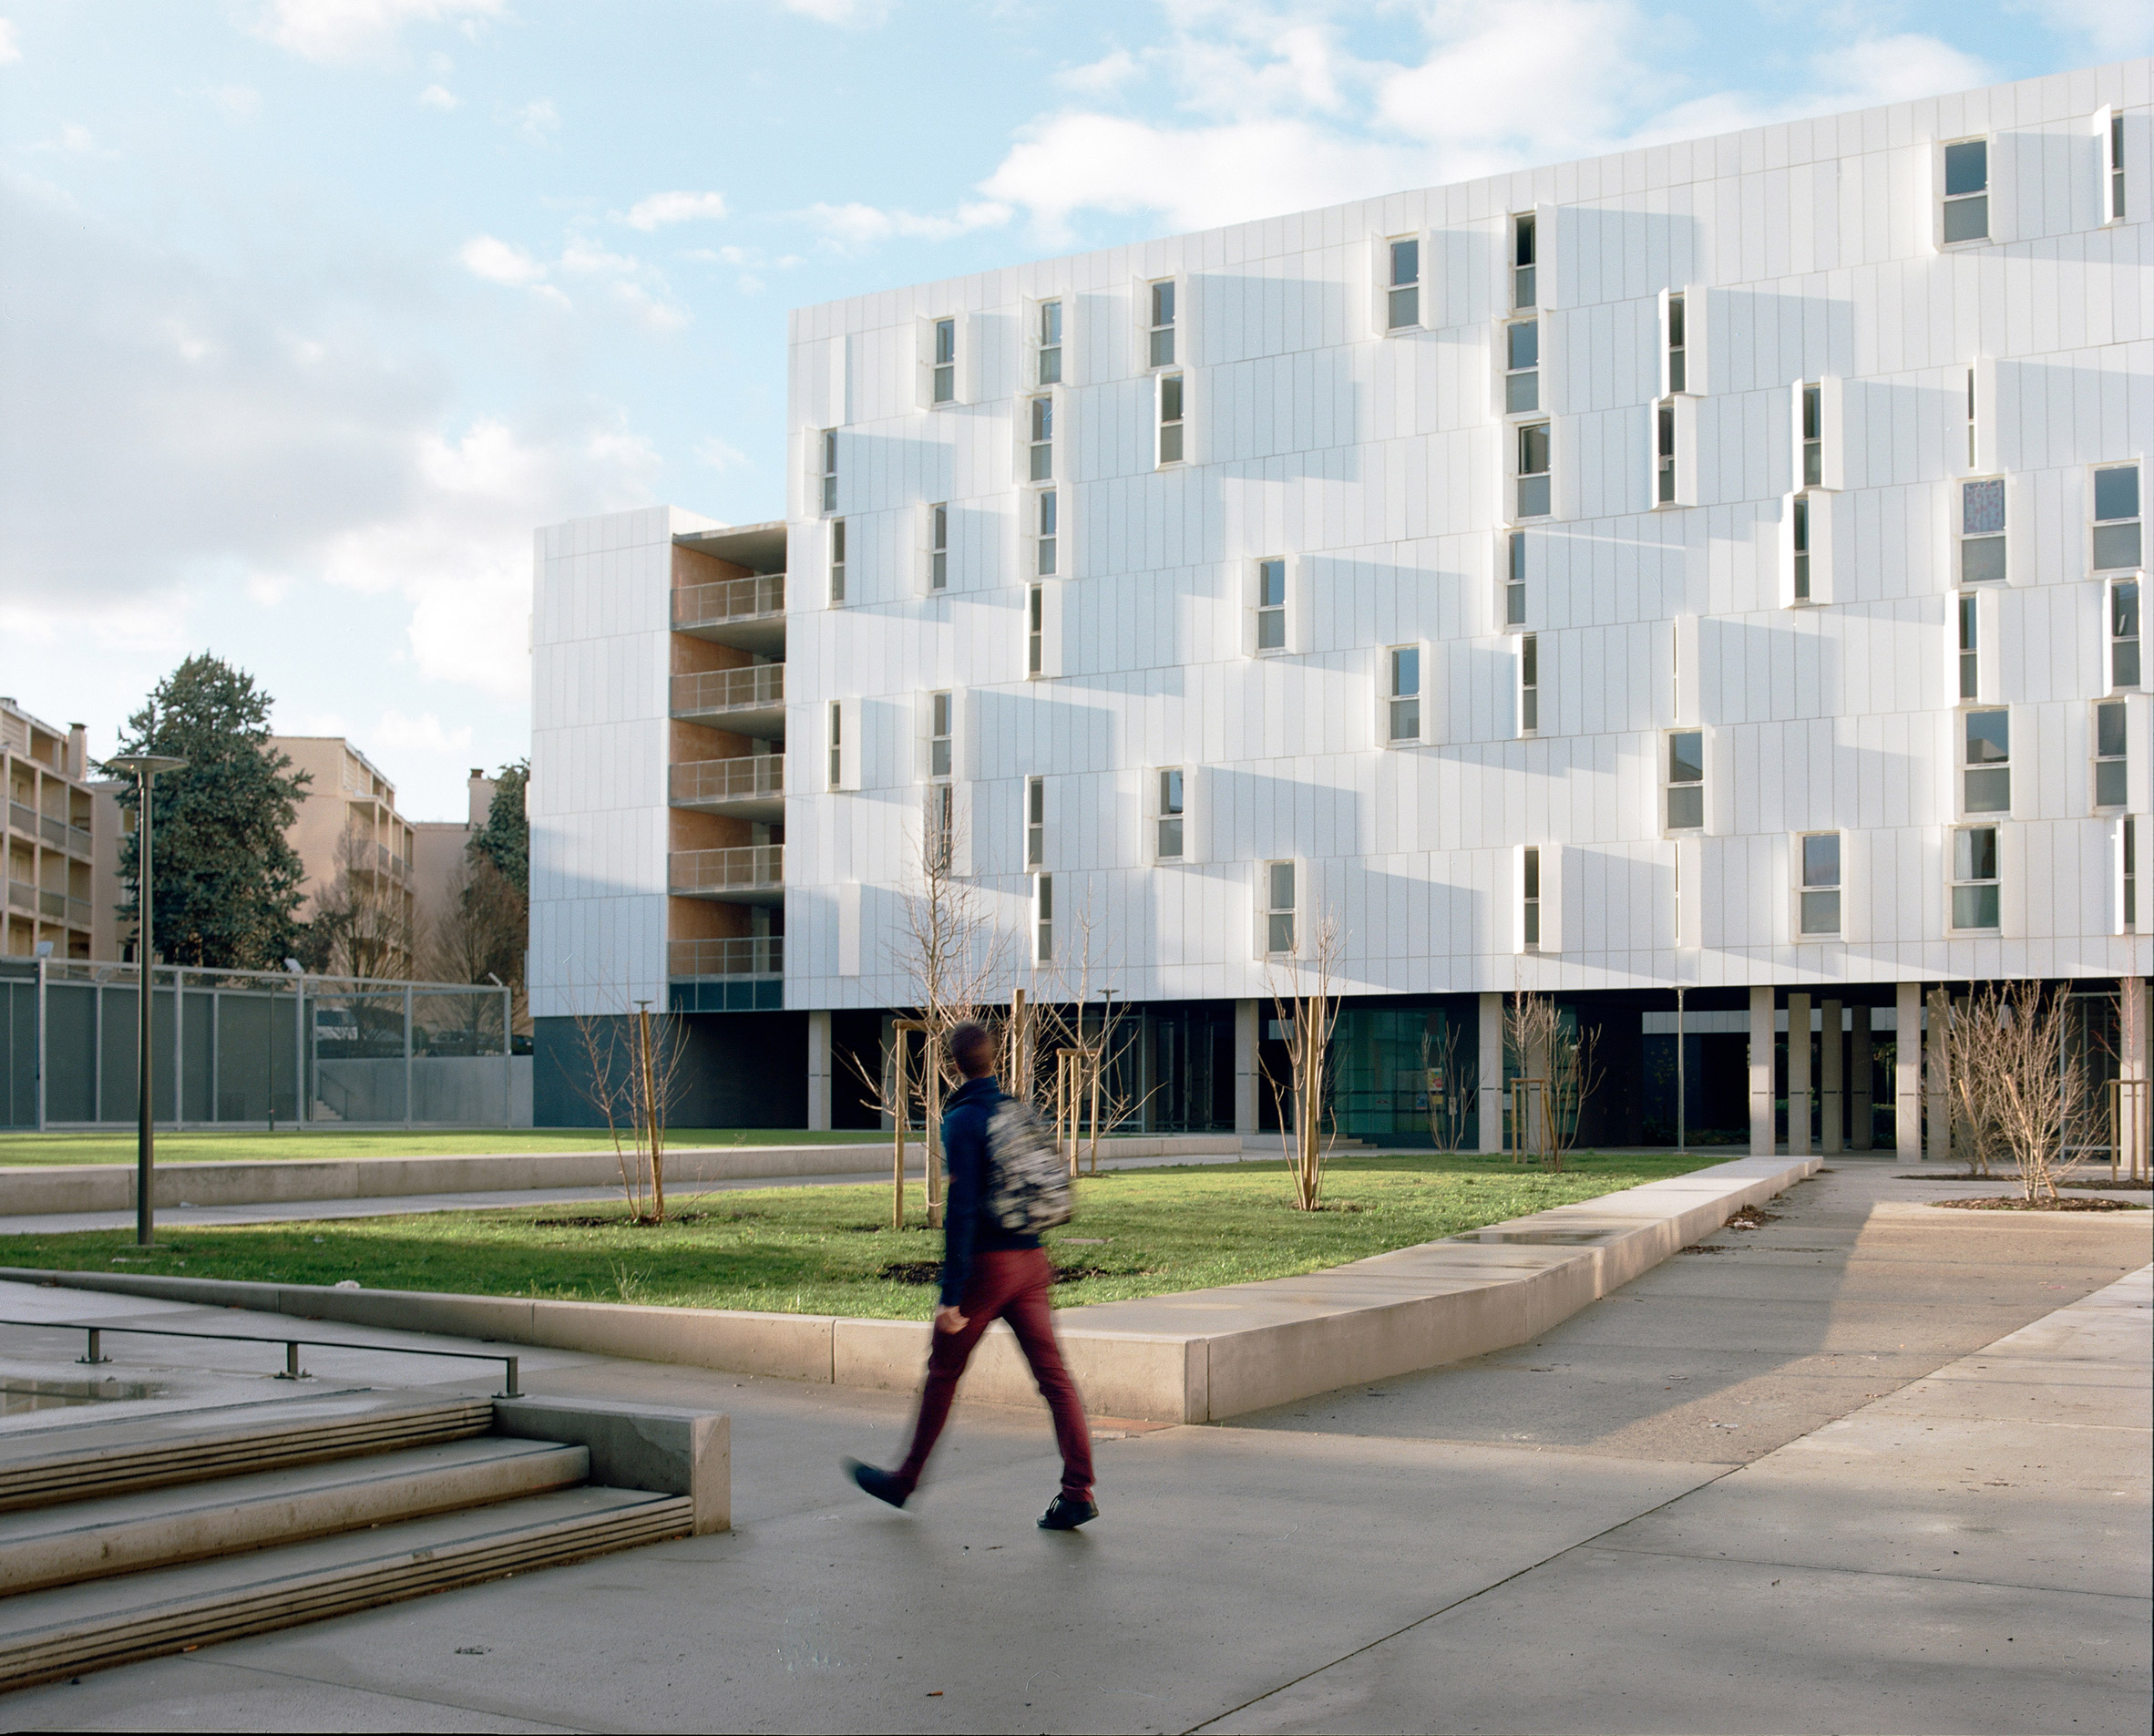 Student accommodation at Olympe de Gouges University by PPA Architecture